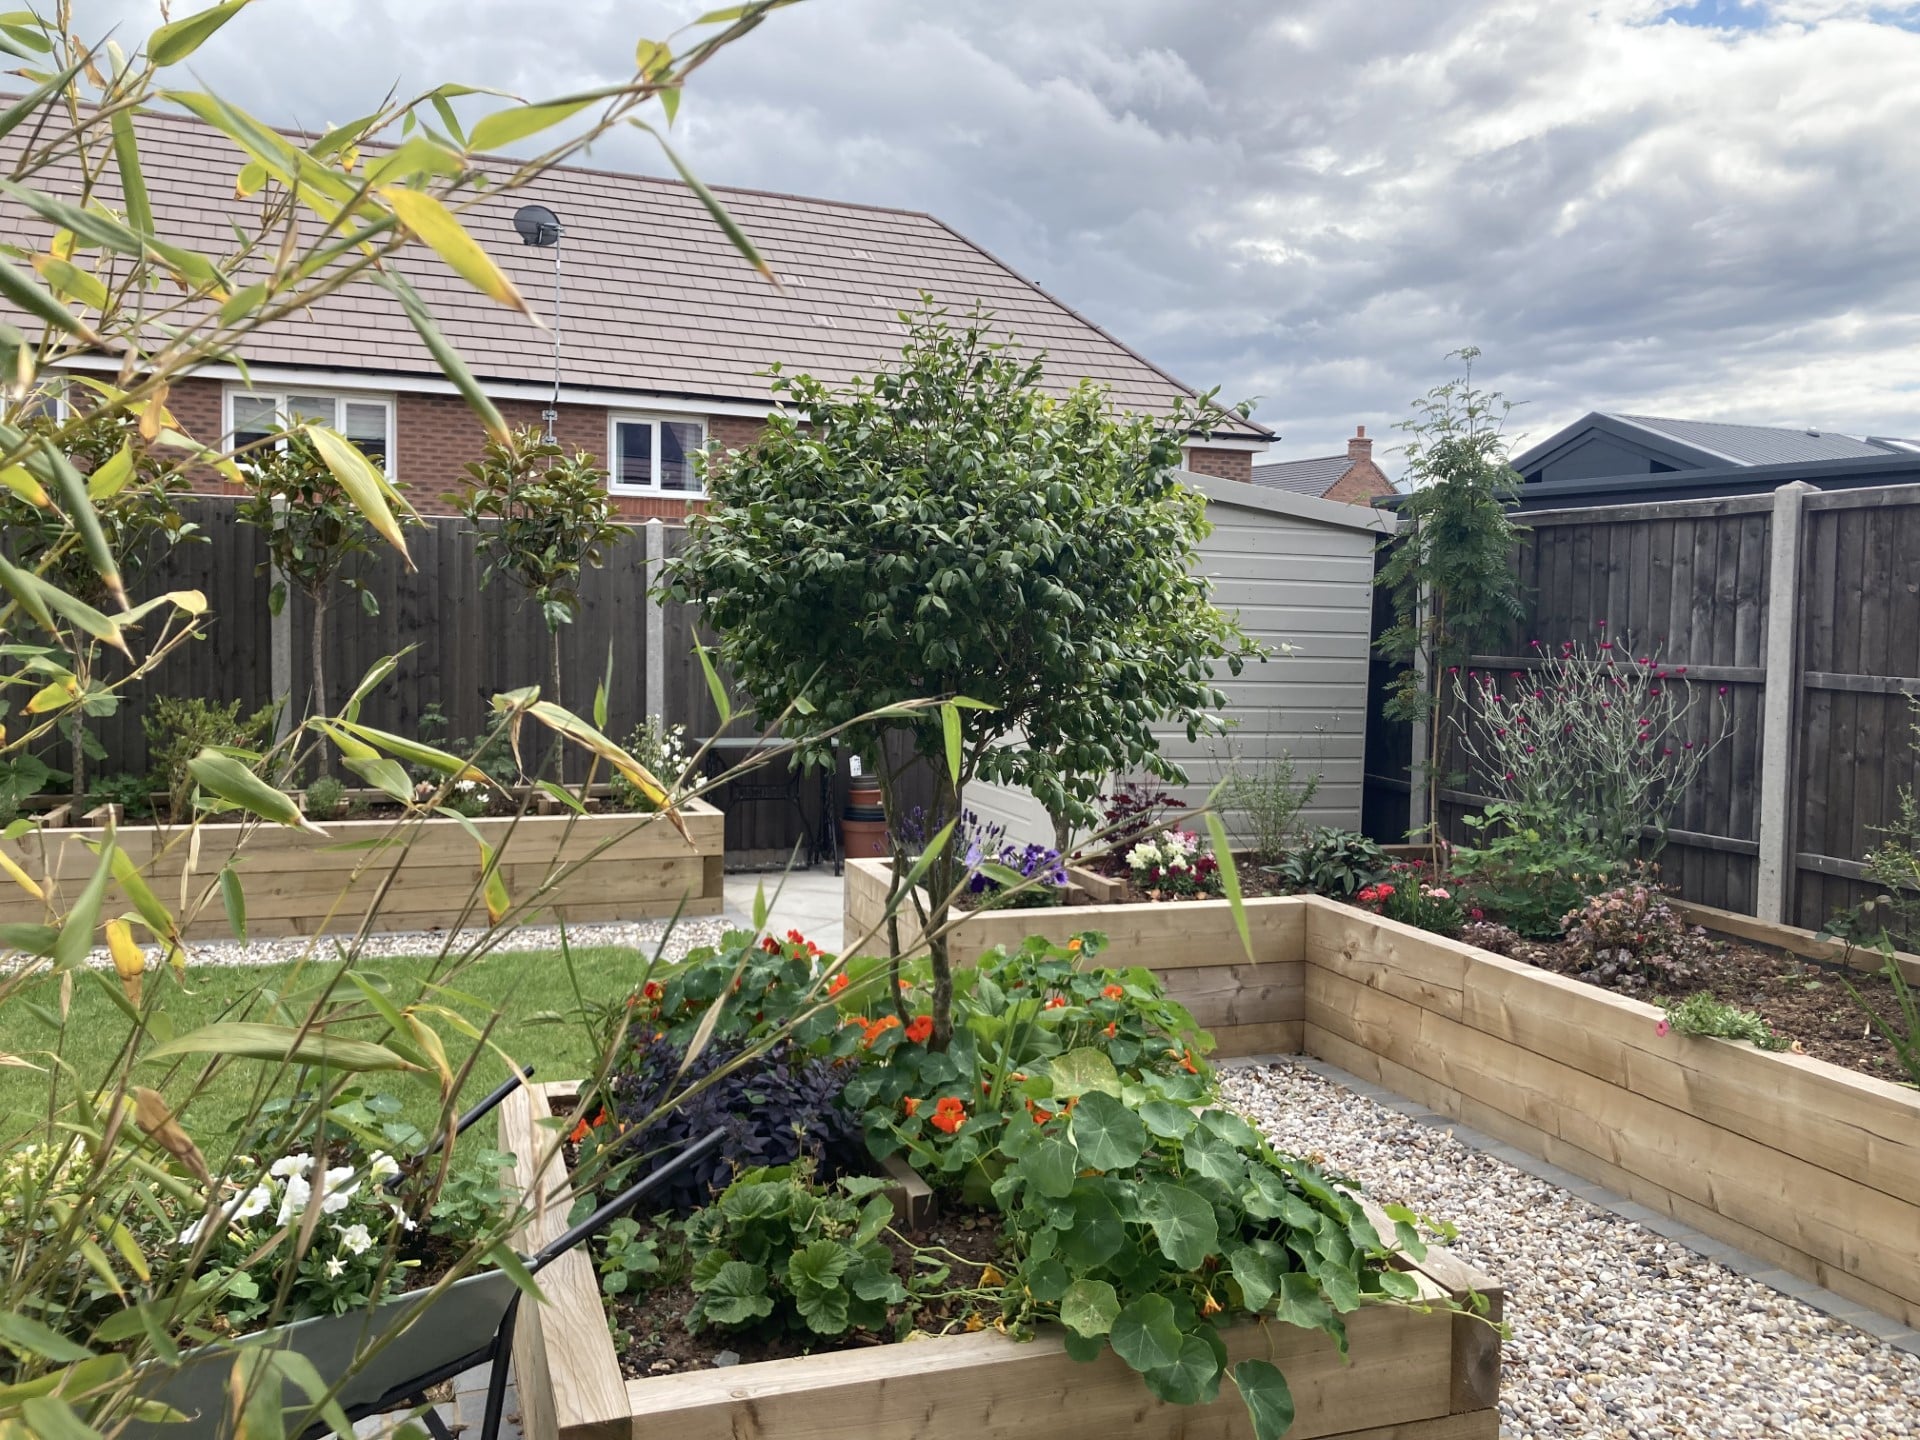 Cottage Garden in Suburbia Case Study - After - raised beds and shed